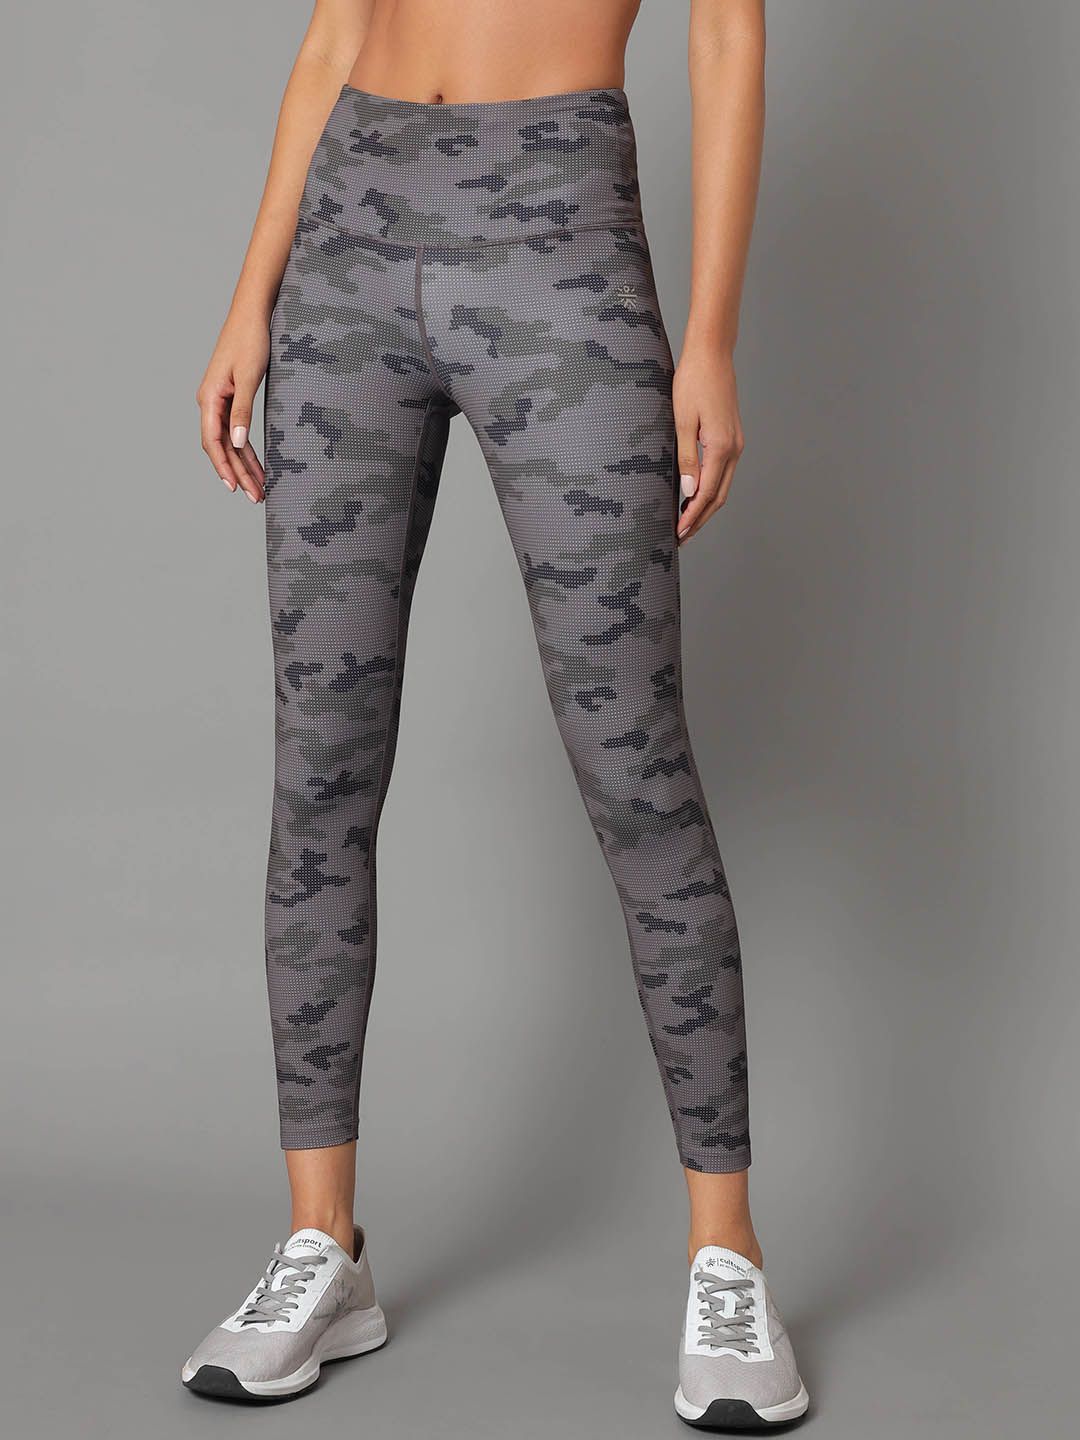 Cultsport Women Grey & Black Printed Tights Price in India